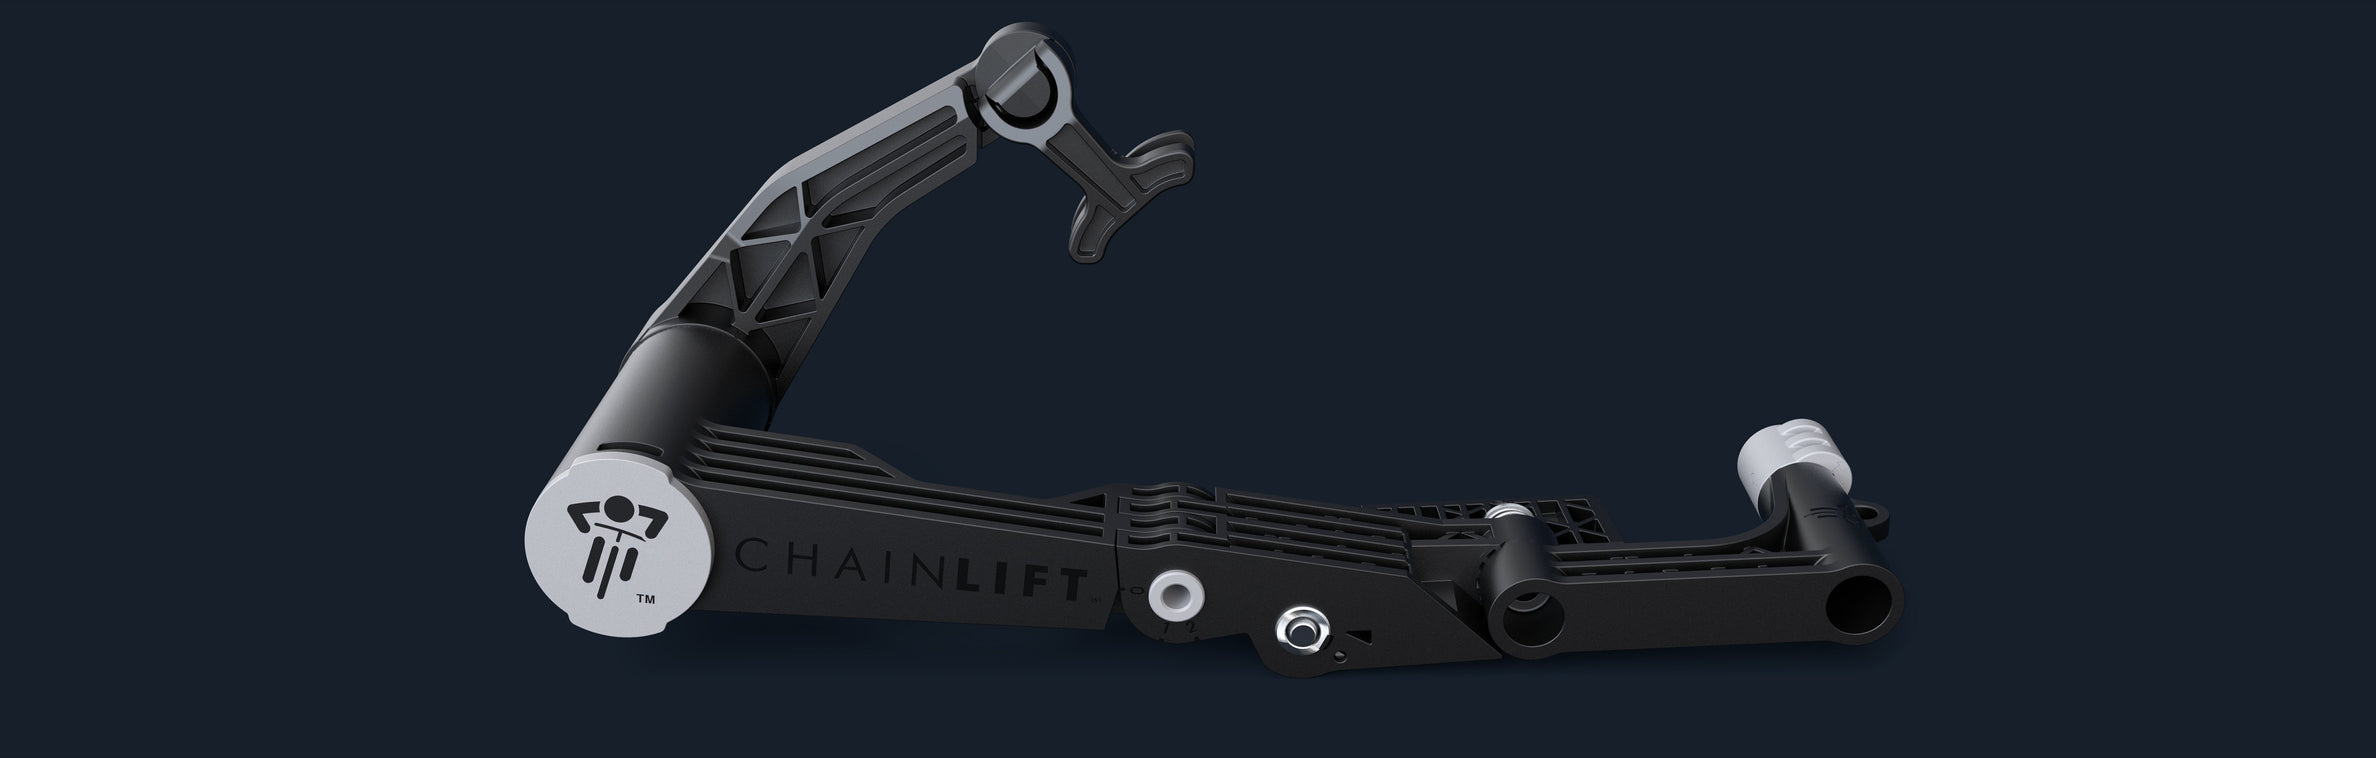 Chainlift-Rendering-1_Dynamic-Placement-